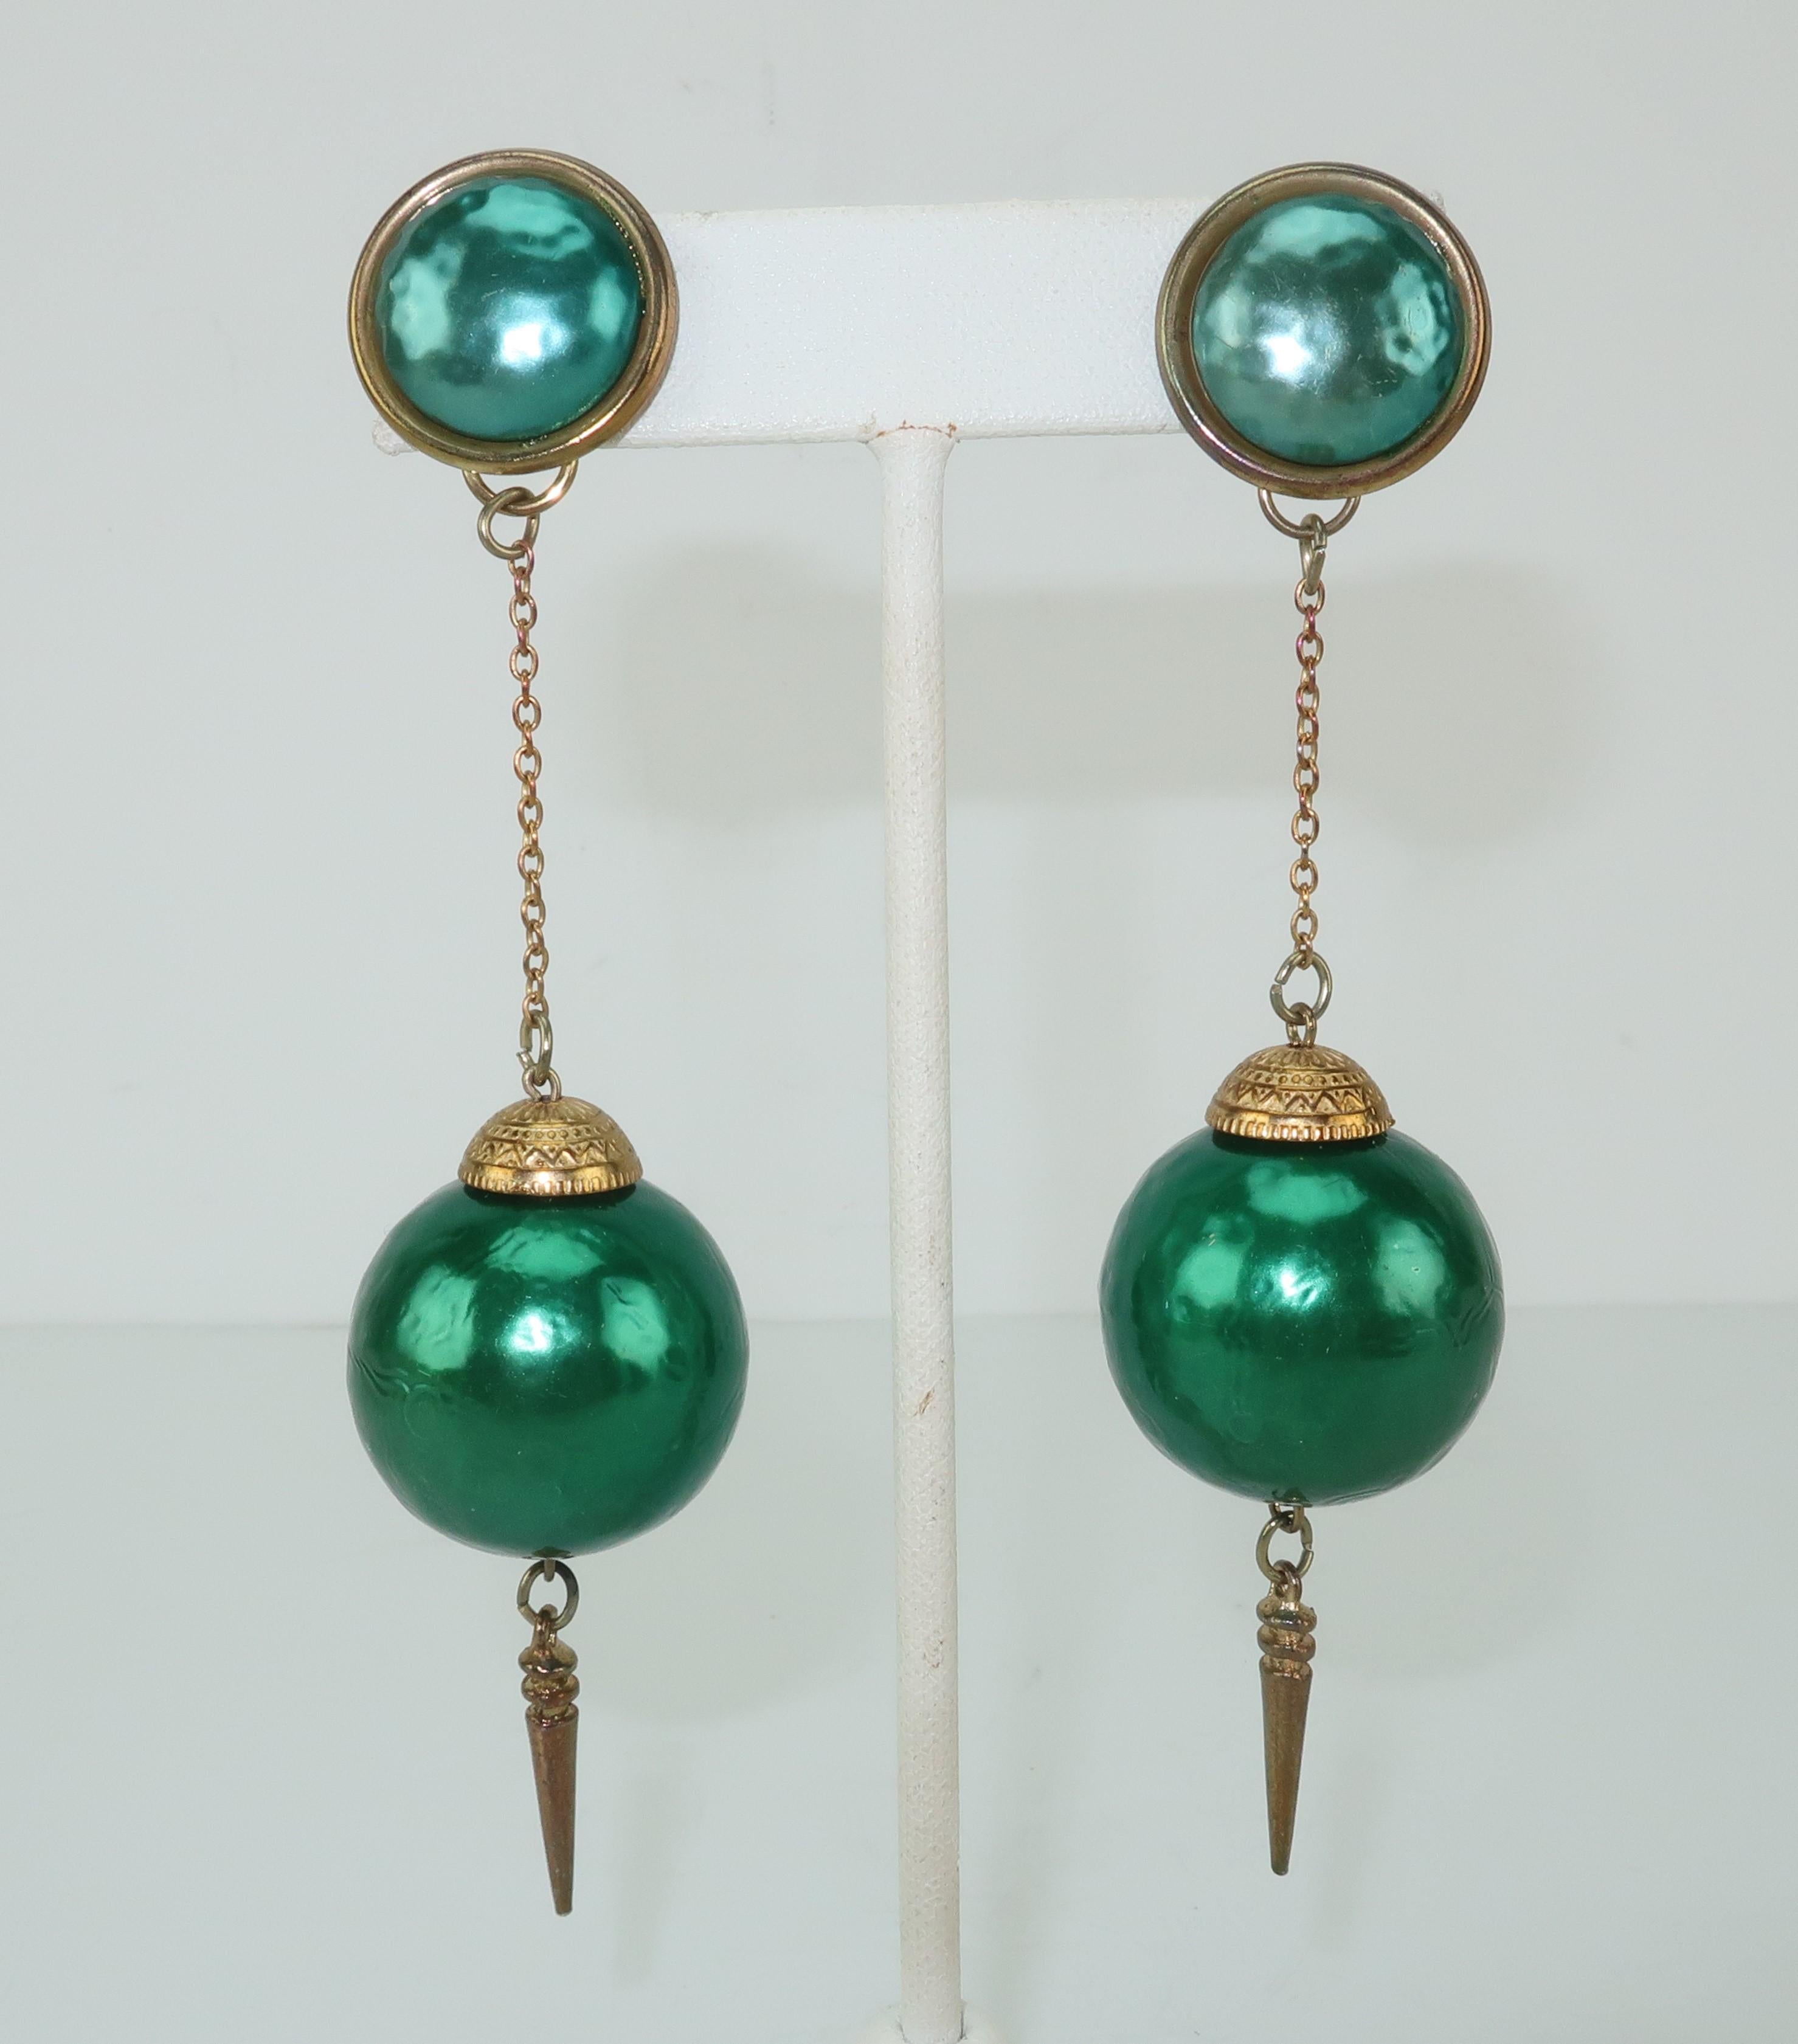 C.1970 pierced post dangle earrings consisting of textured teal green orbs embellished with gold tone metal exotically engraved caps and accented with suspended dagger shaped cones.  The earring bases are also a textured teal green with a subtly